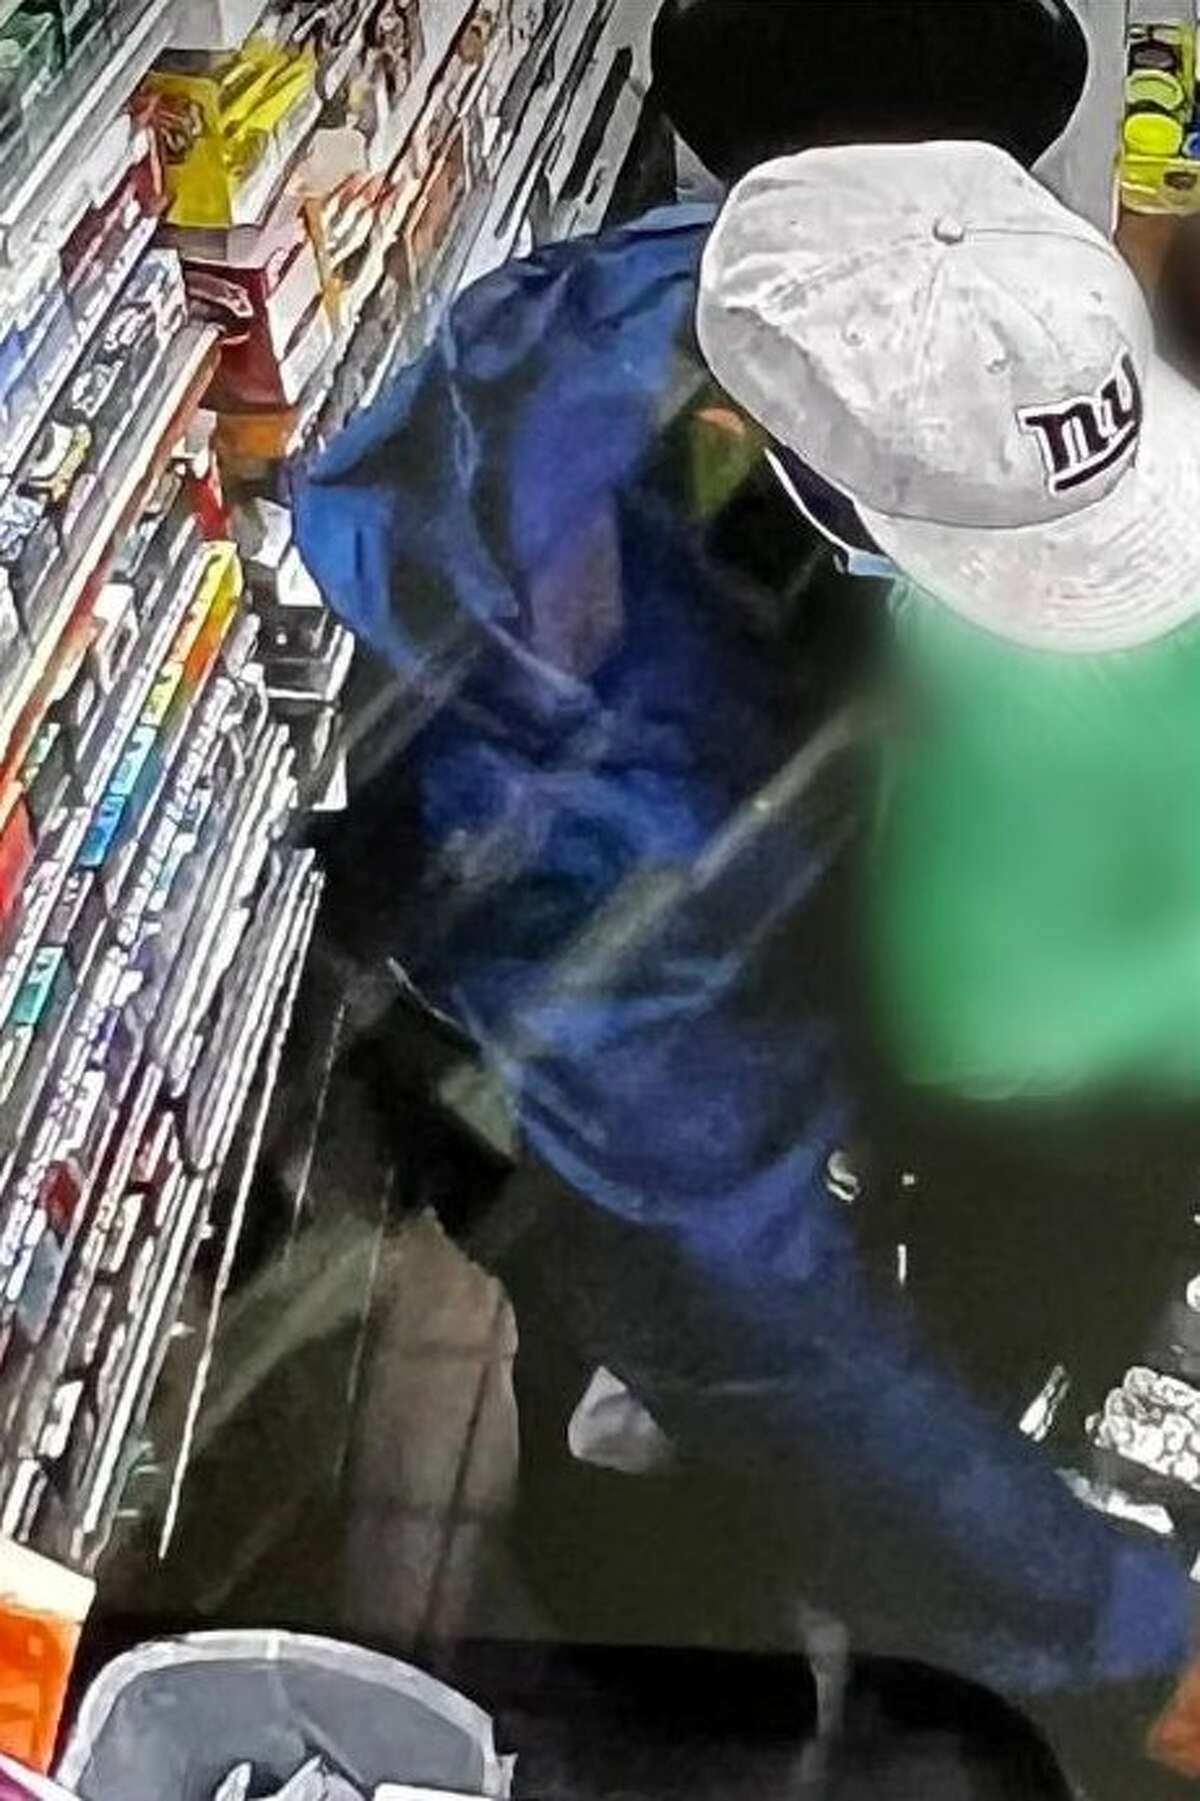 Plymouth Police are looking for the man, who is suspected of using a knife to rob two petrol stations along Main Street on Saturday night.